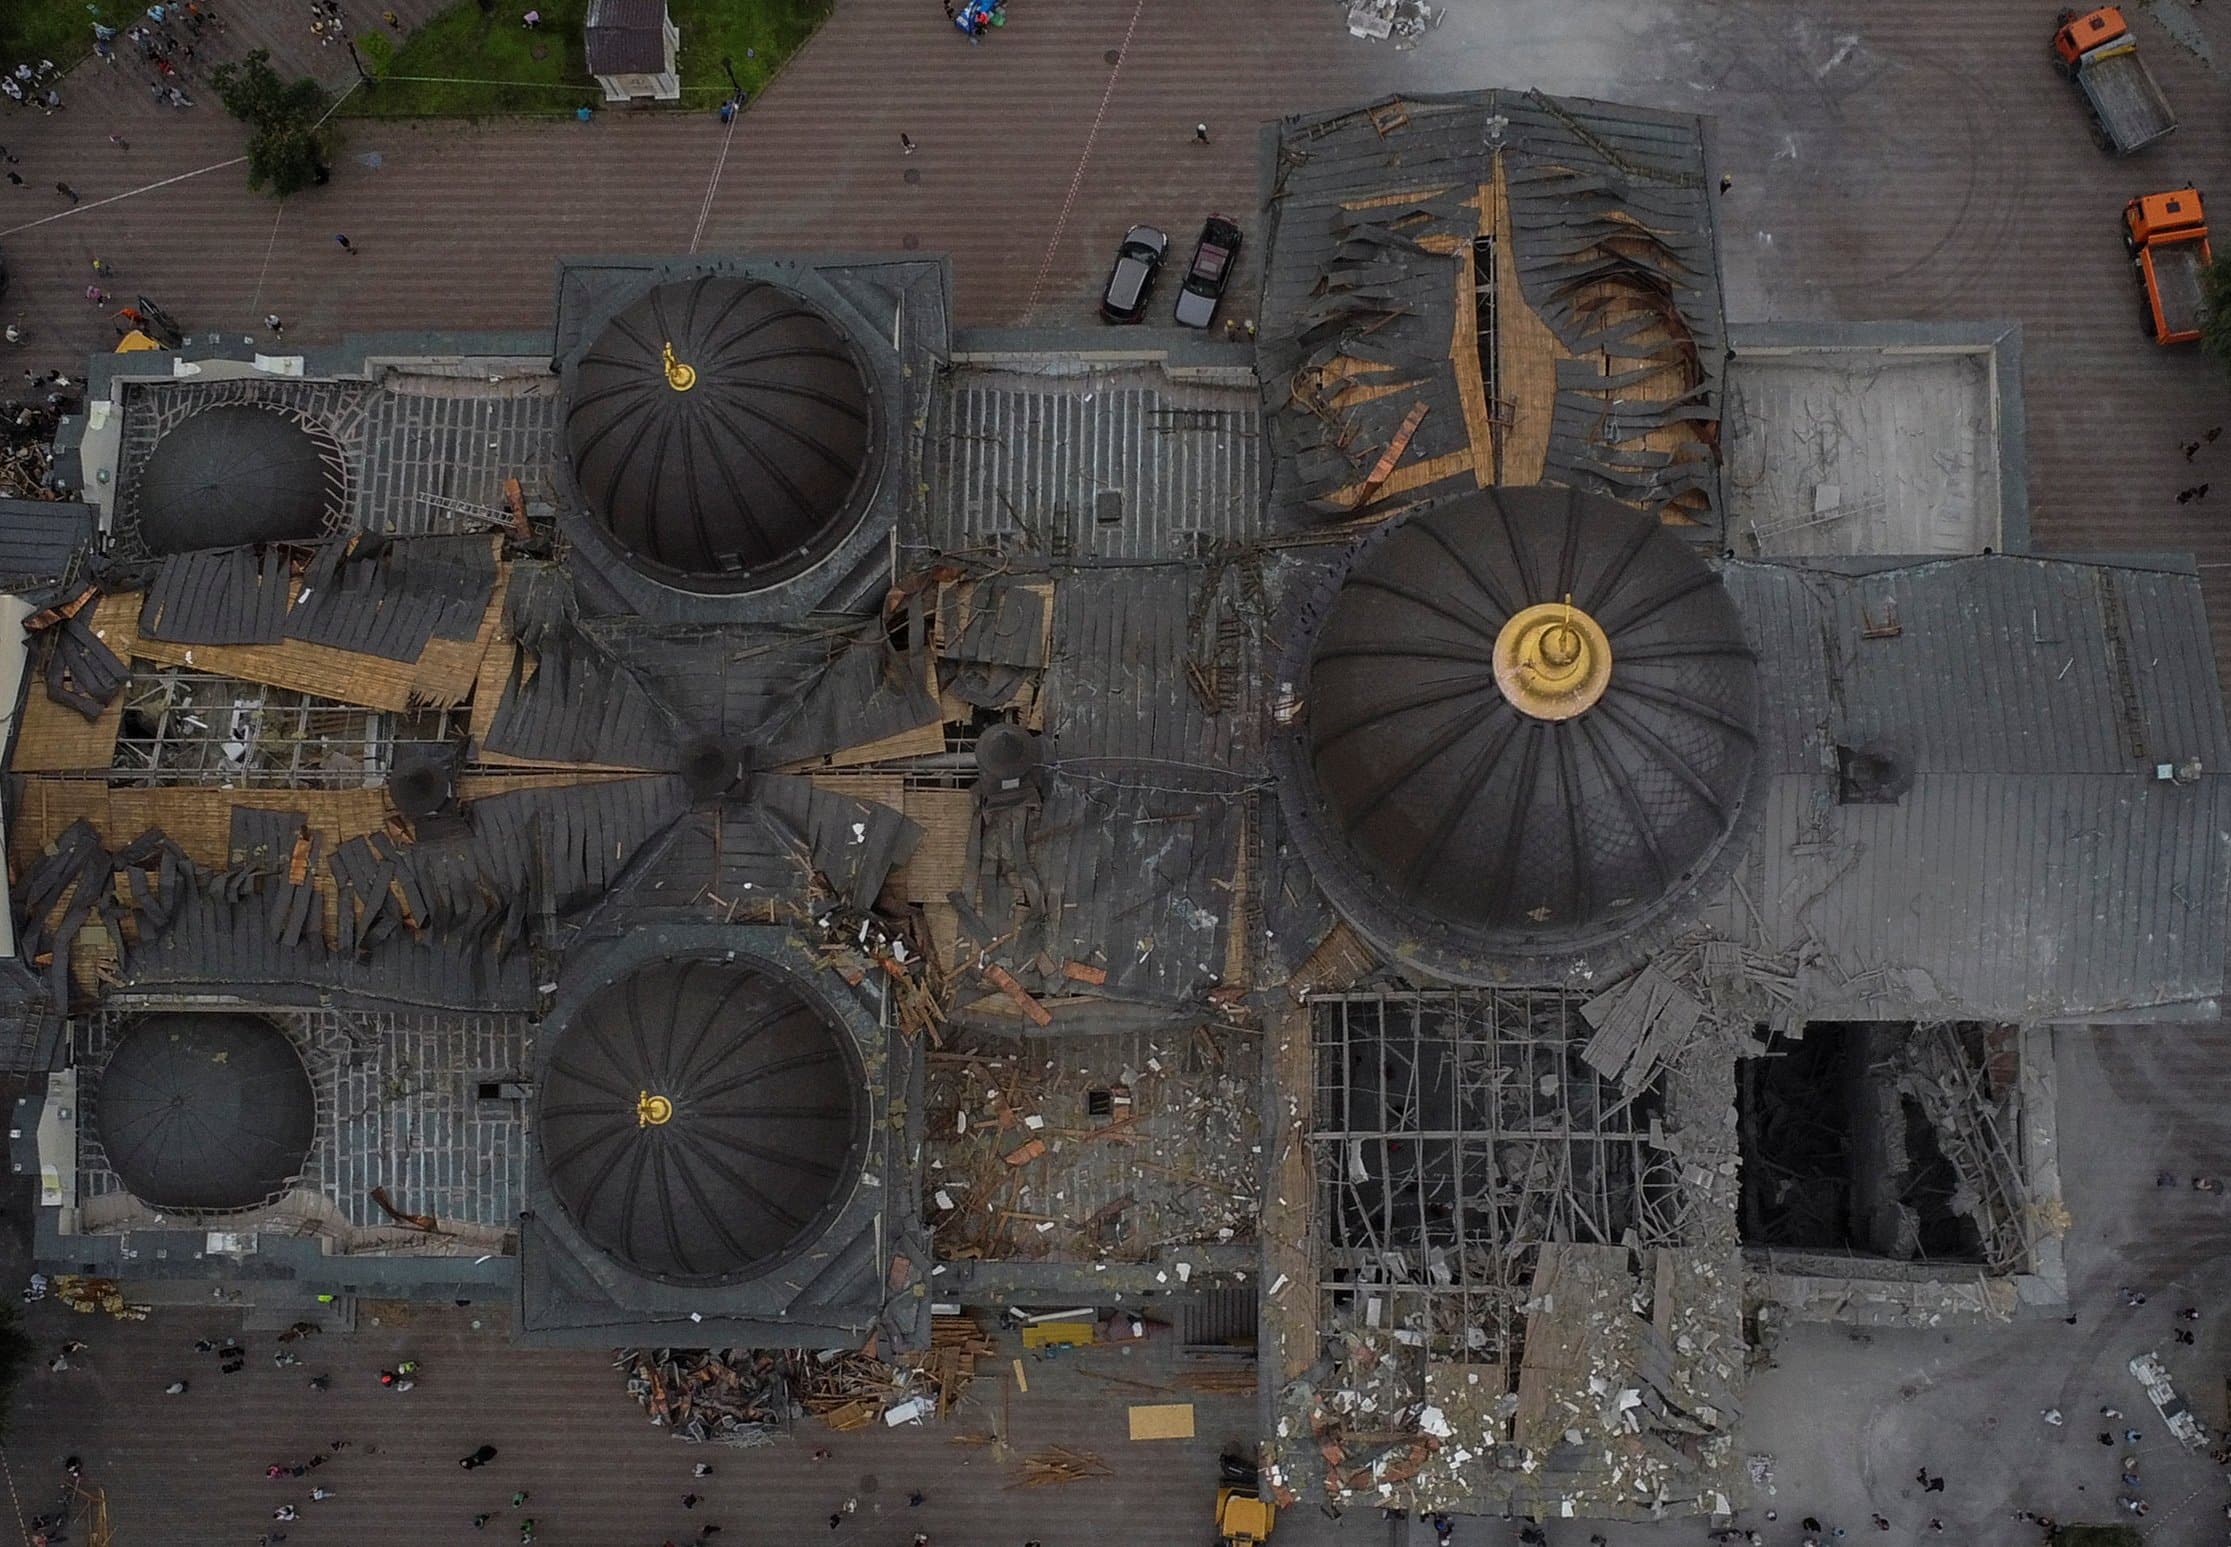 Ariel view shows the Transfiguration Cathedral in Odesa, Ukraine, damaged